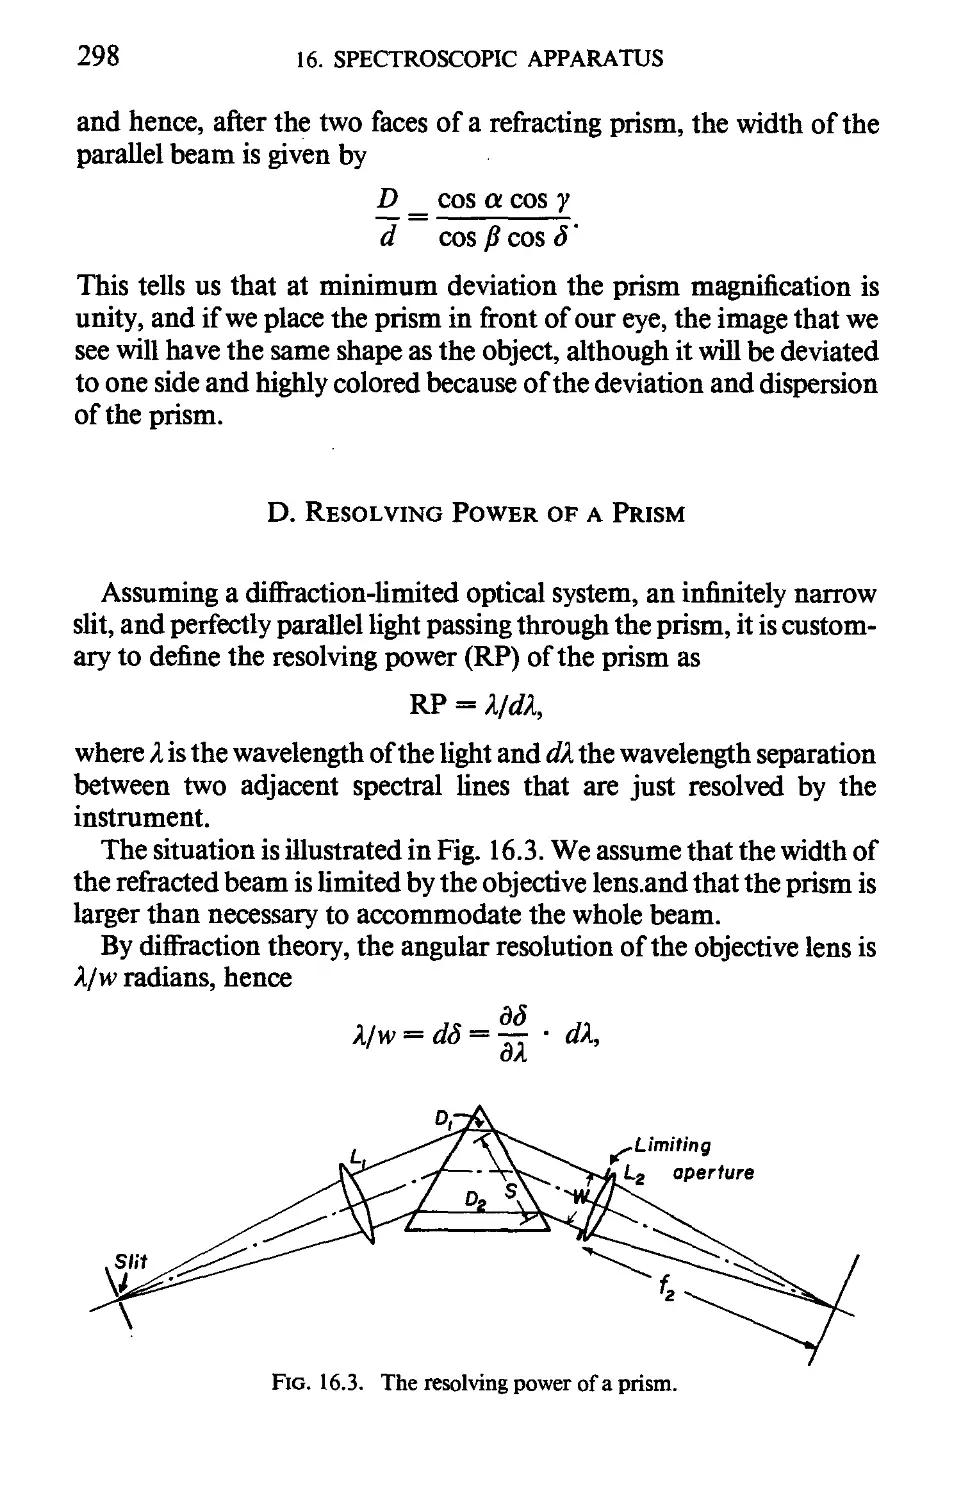 D. Resolving Power of a Prism